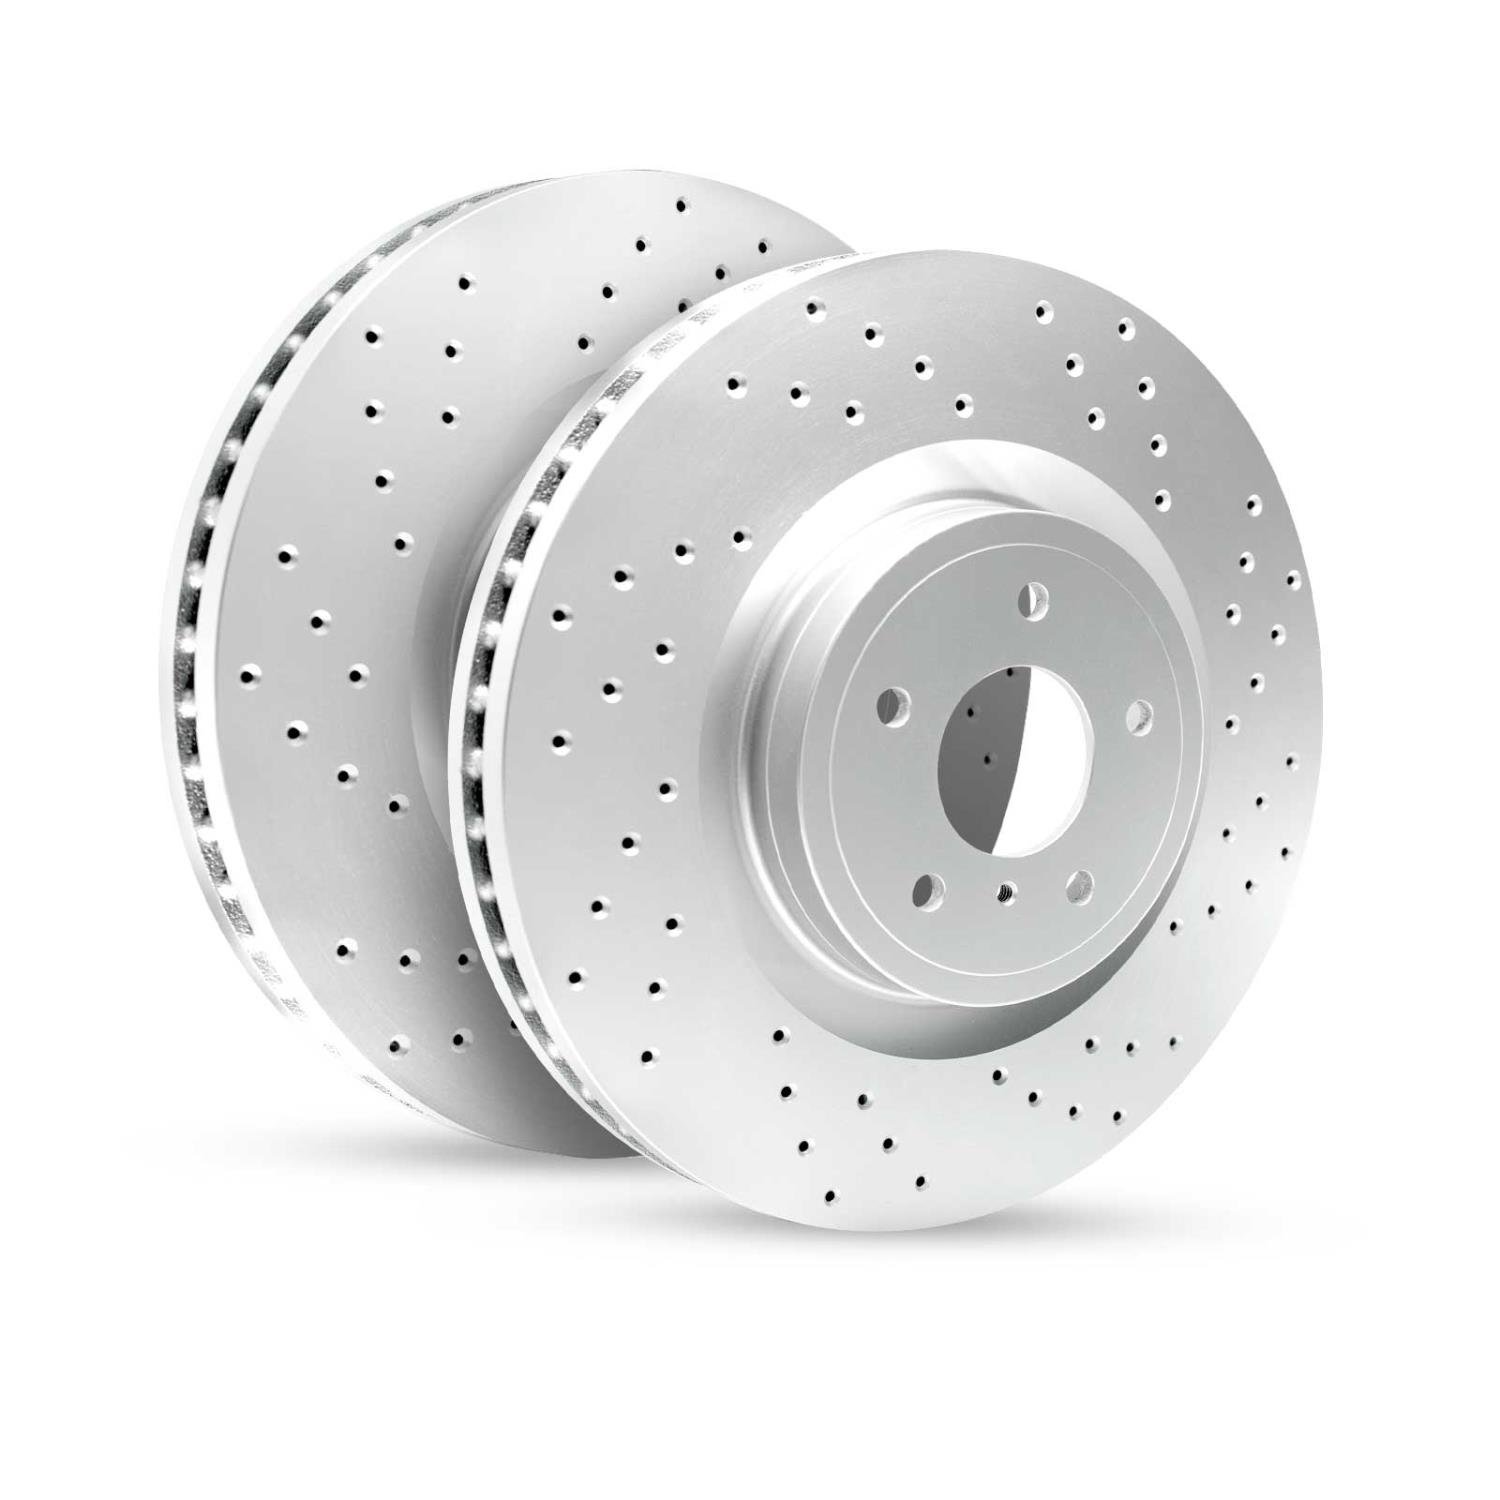 GEO-Carbon Drilled & Slotted Brake Rotor Set, Fits Select Acura/Honda, Position: Front